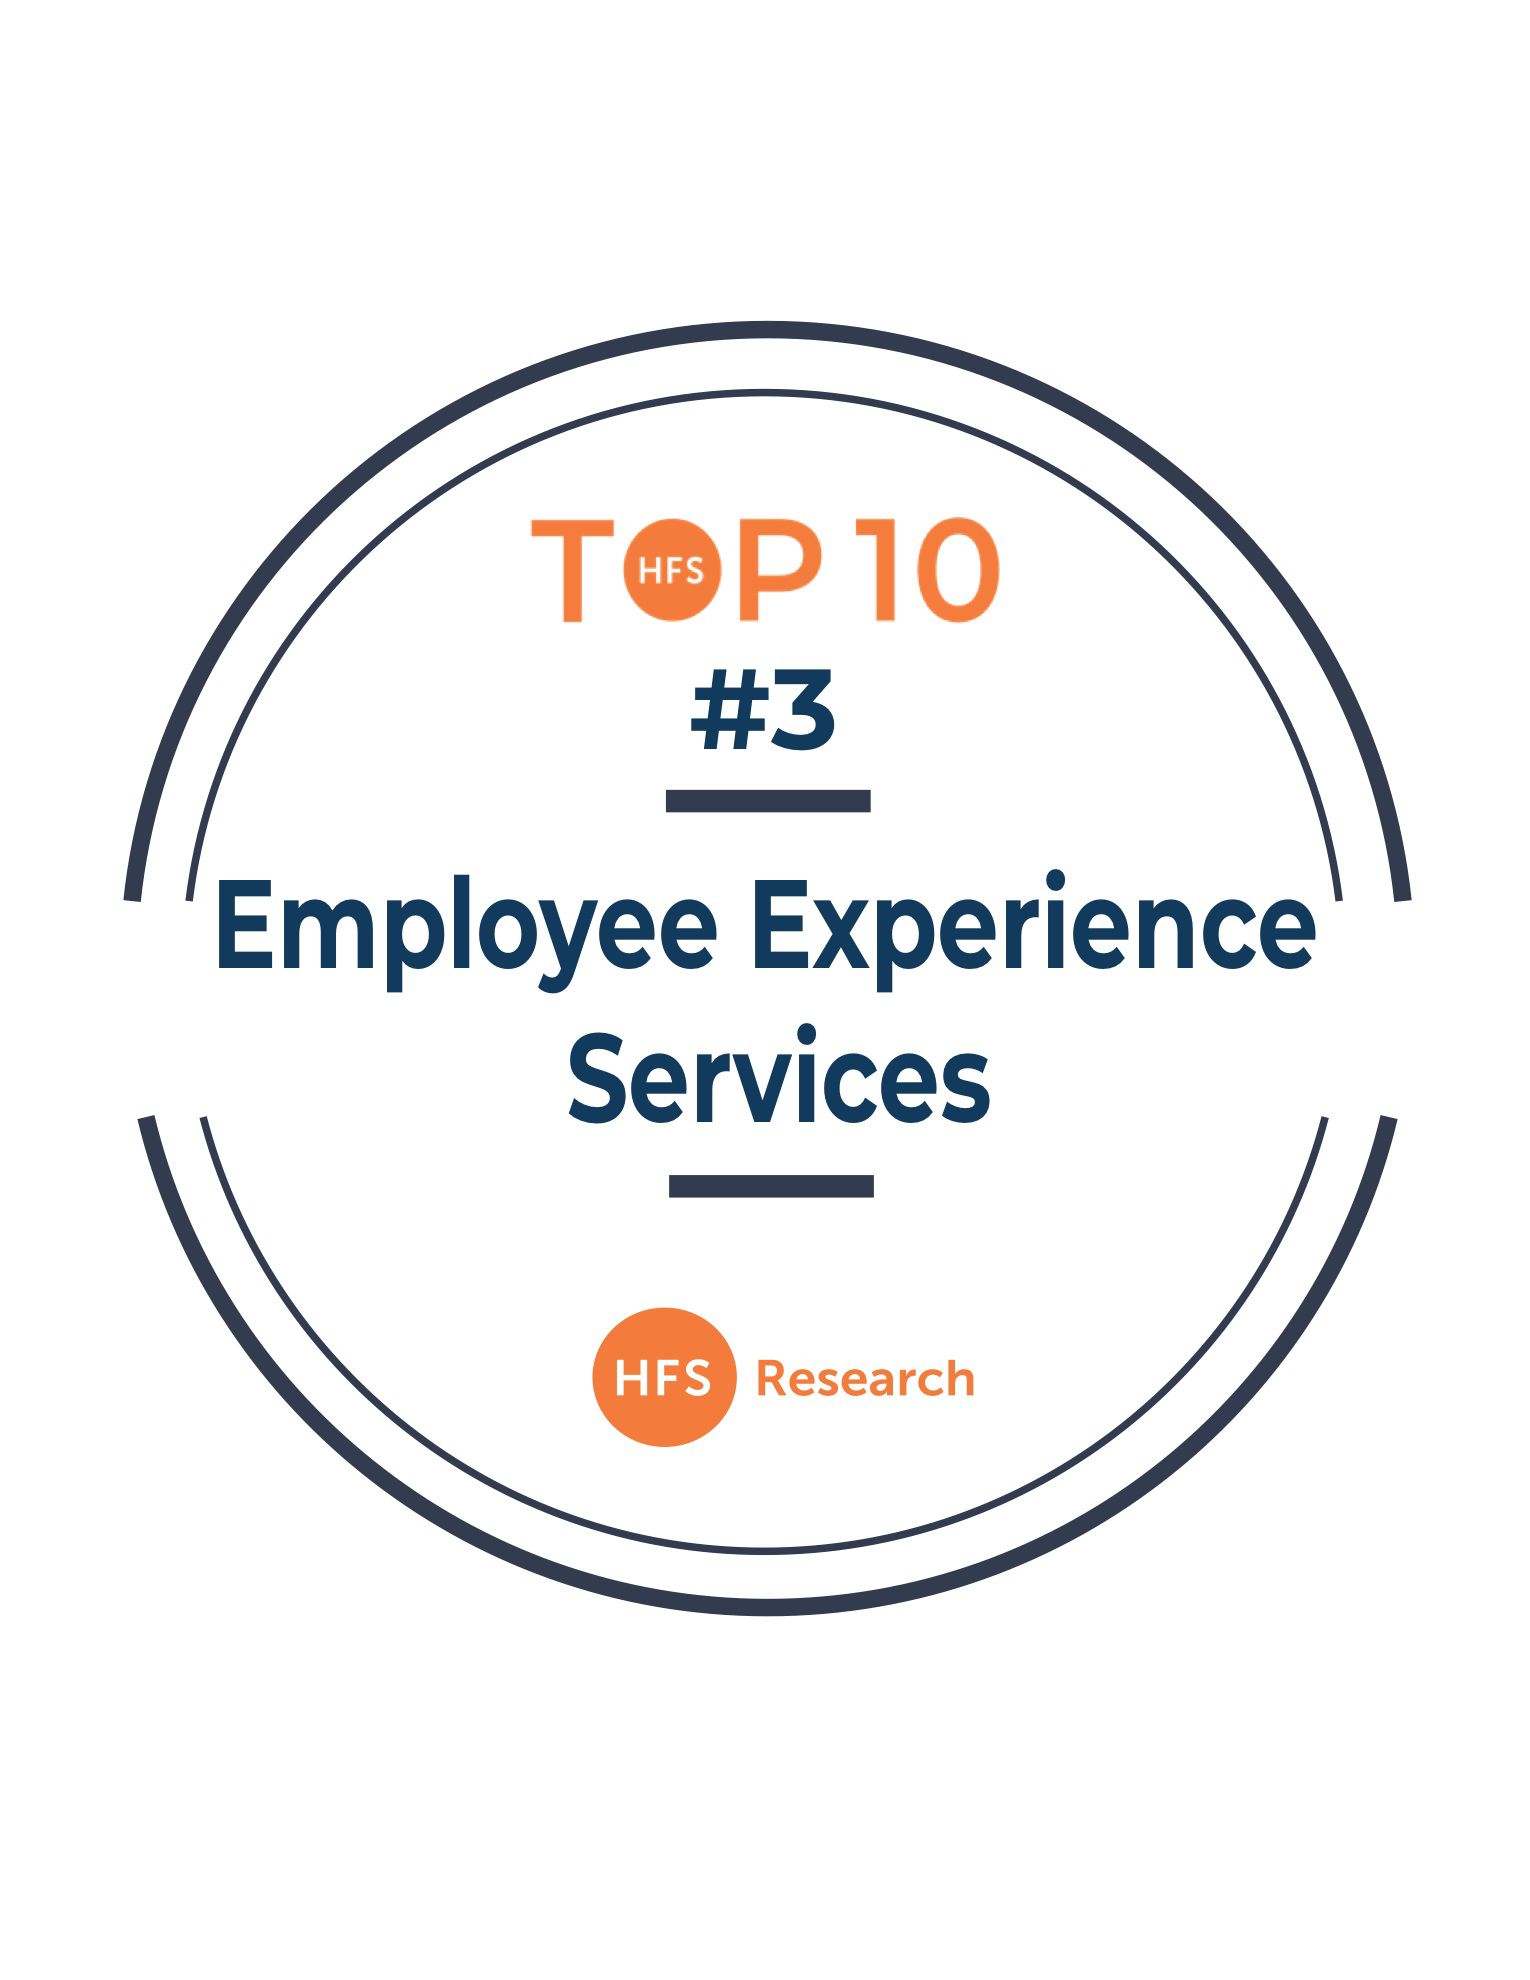 Employee experience services